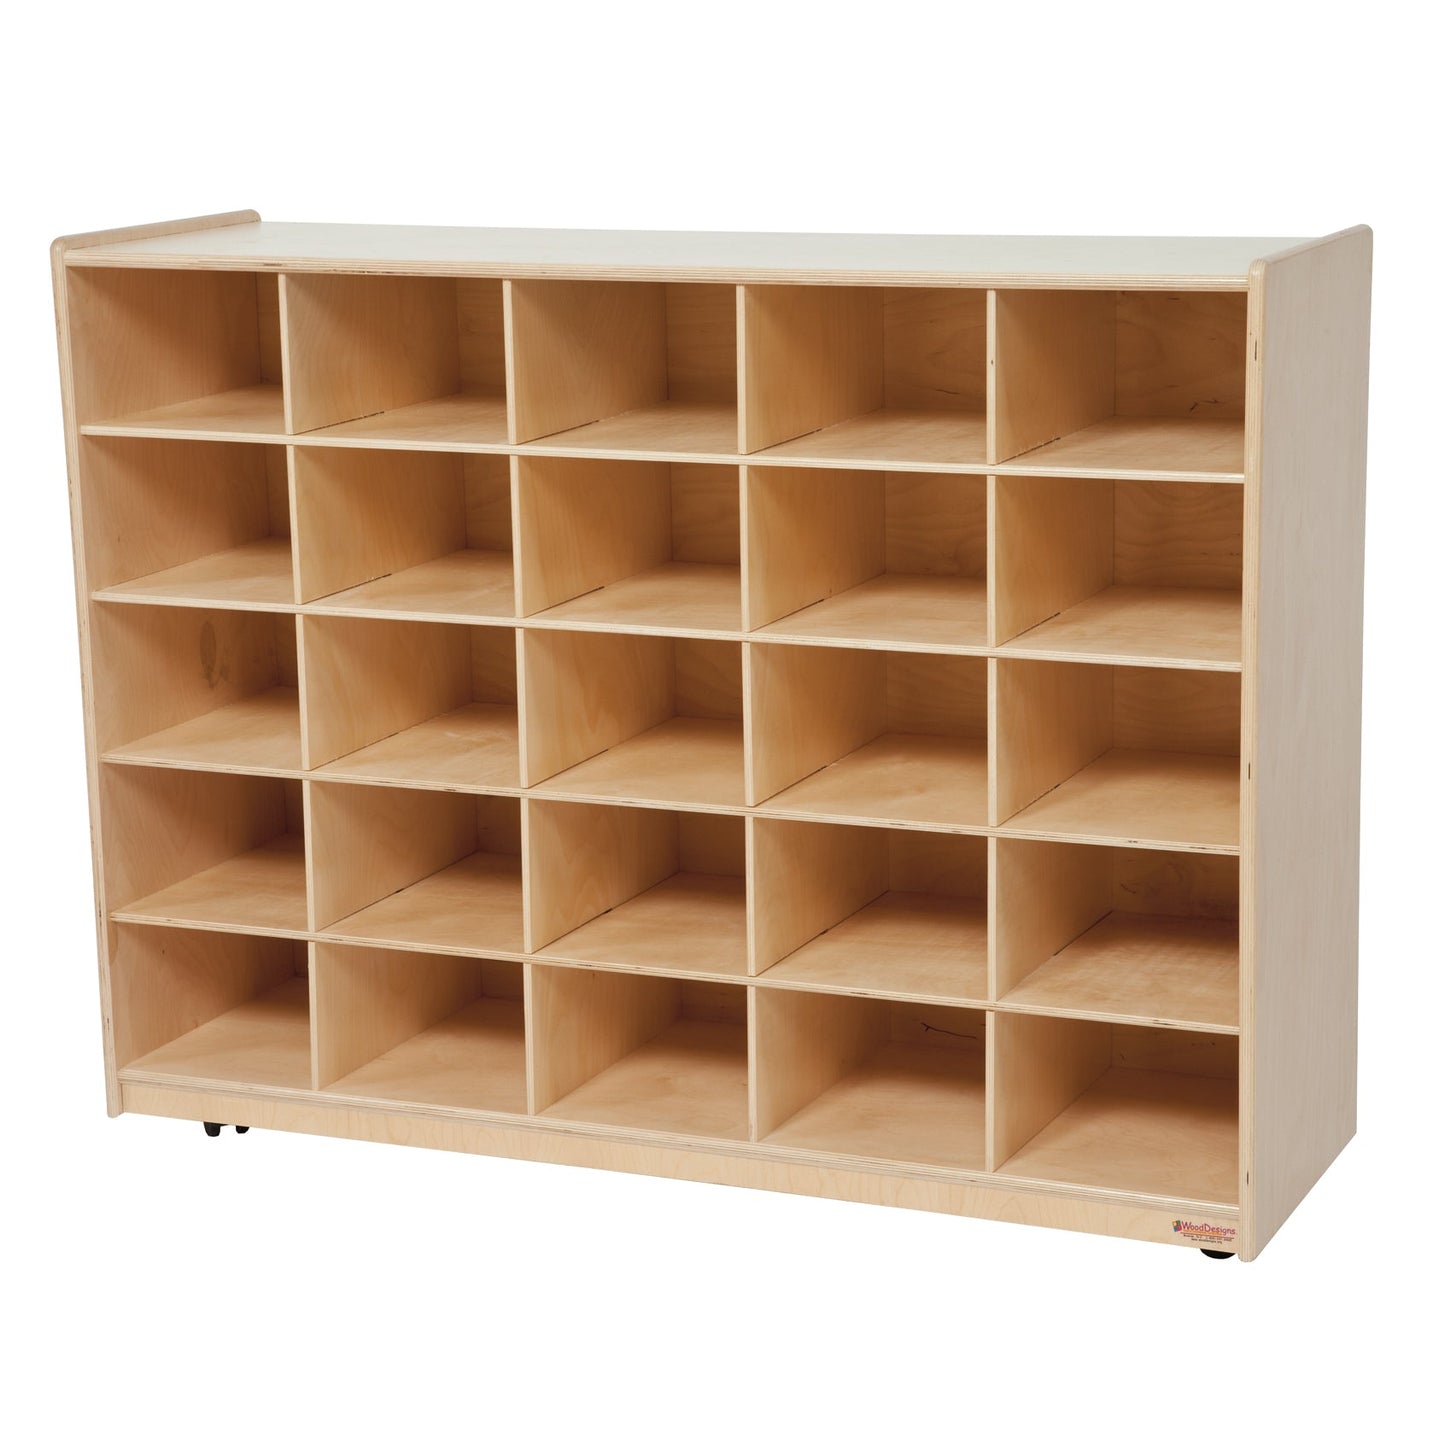 Wood Designs 25 Tray Storage - 38"H x 48"W - SchoolOutlet